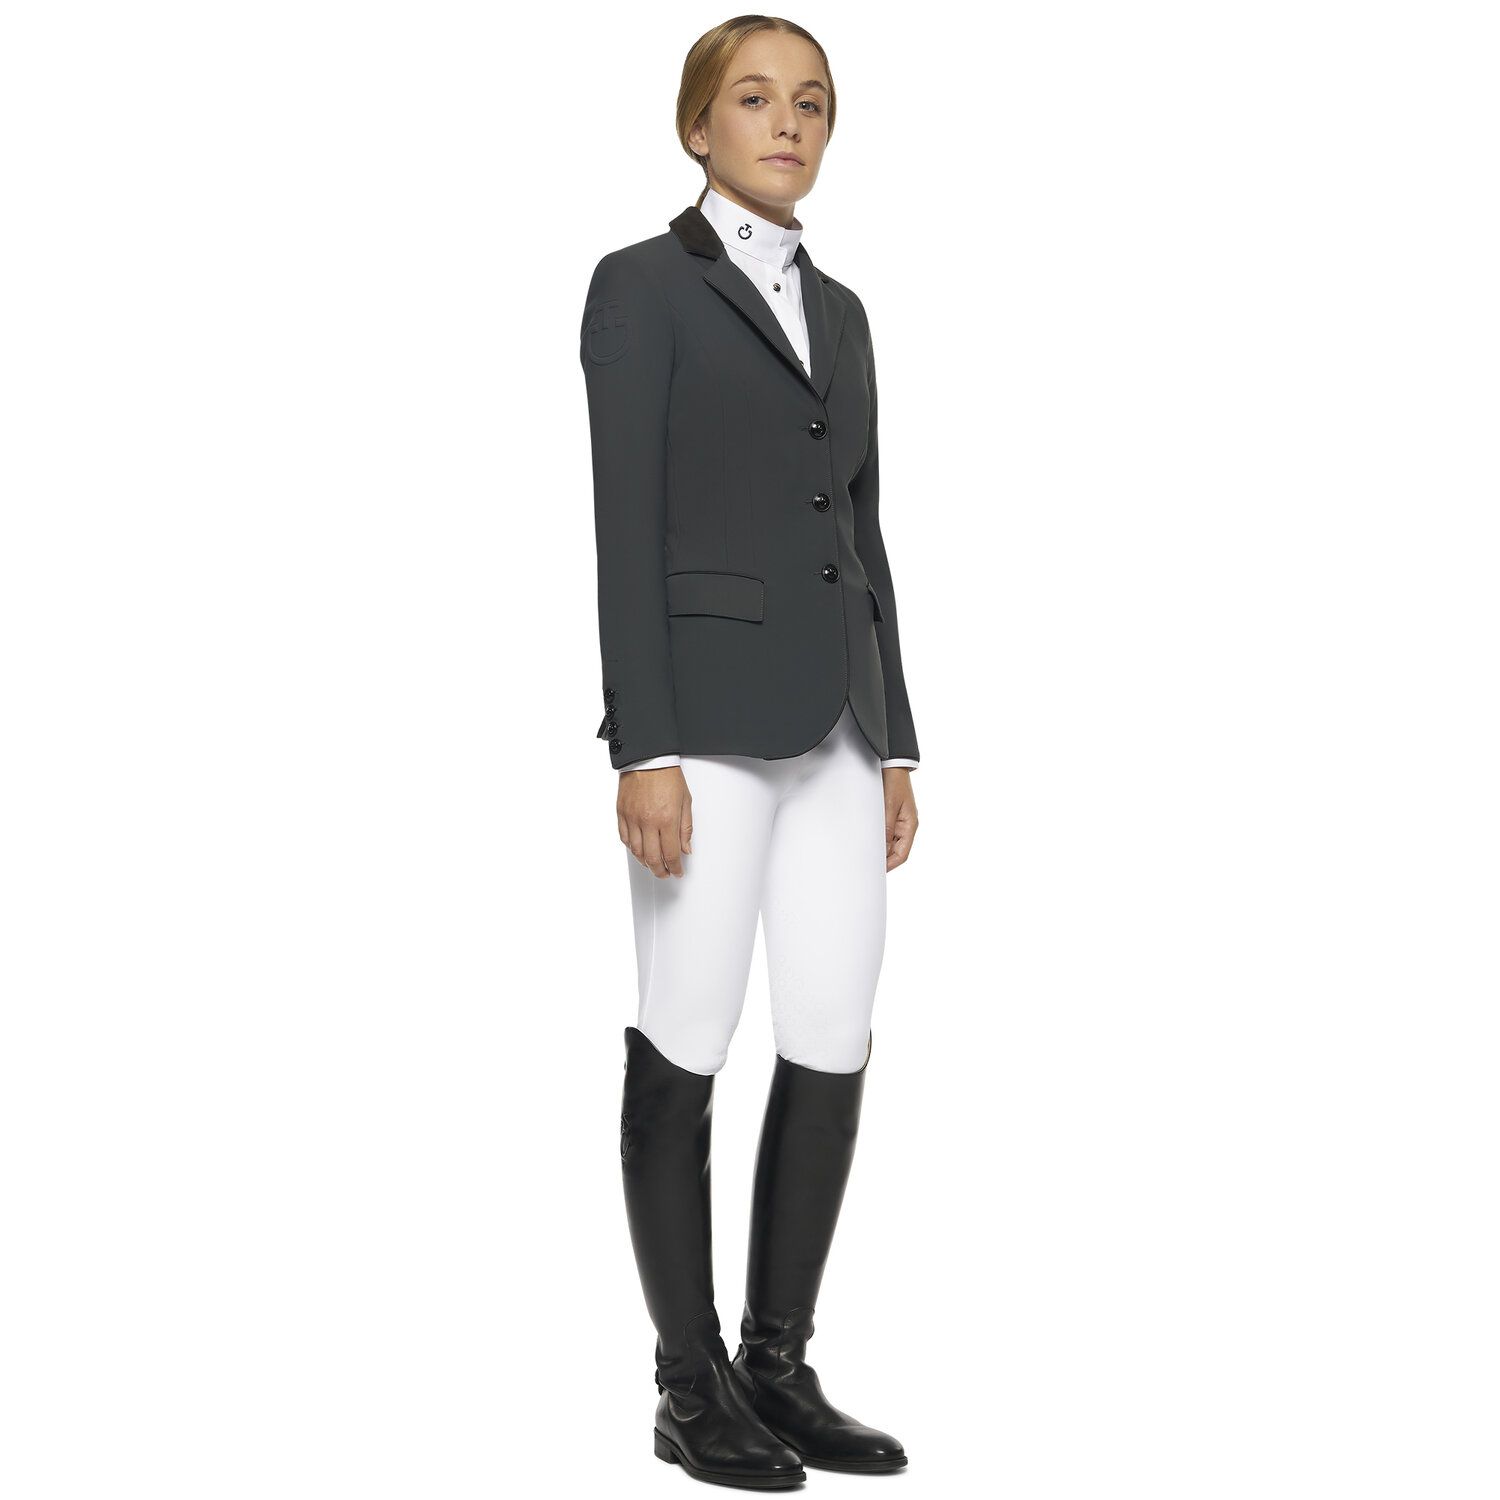 Cavalleria Toscana Women's competition riding jacket. CHARCOAL GREY-2